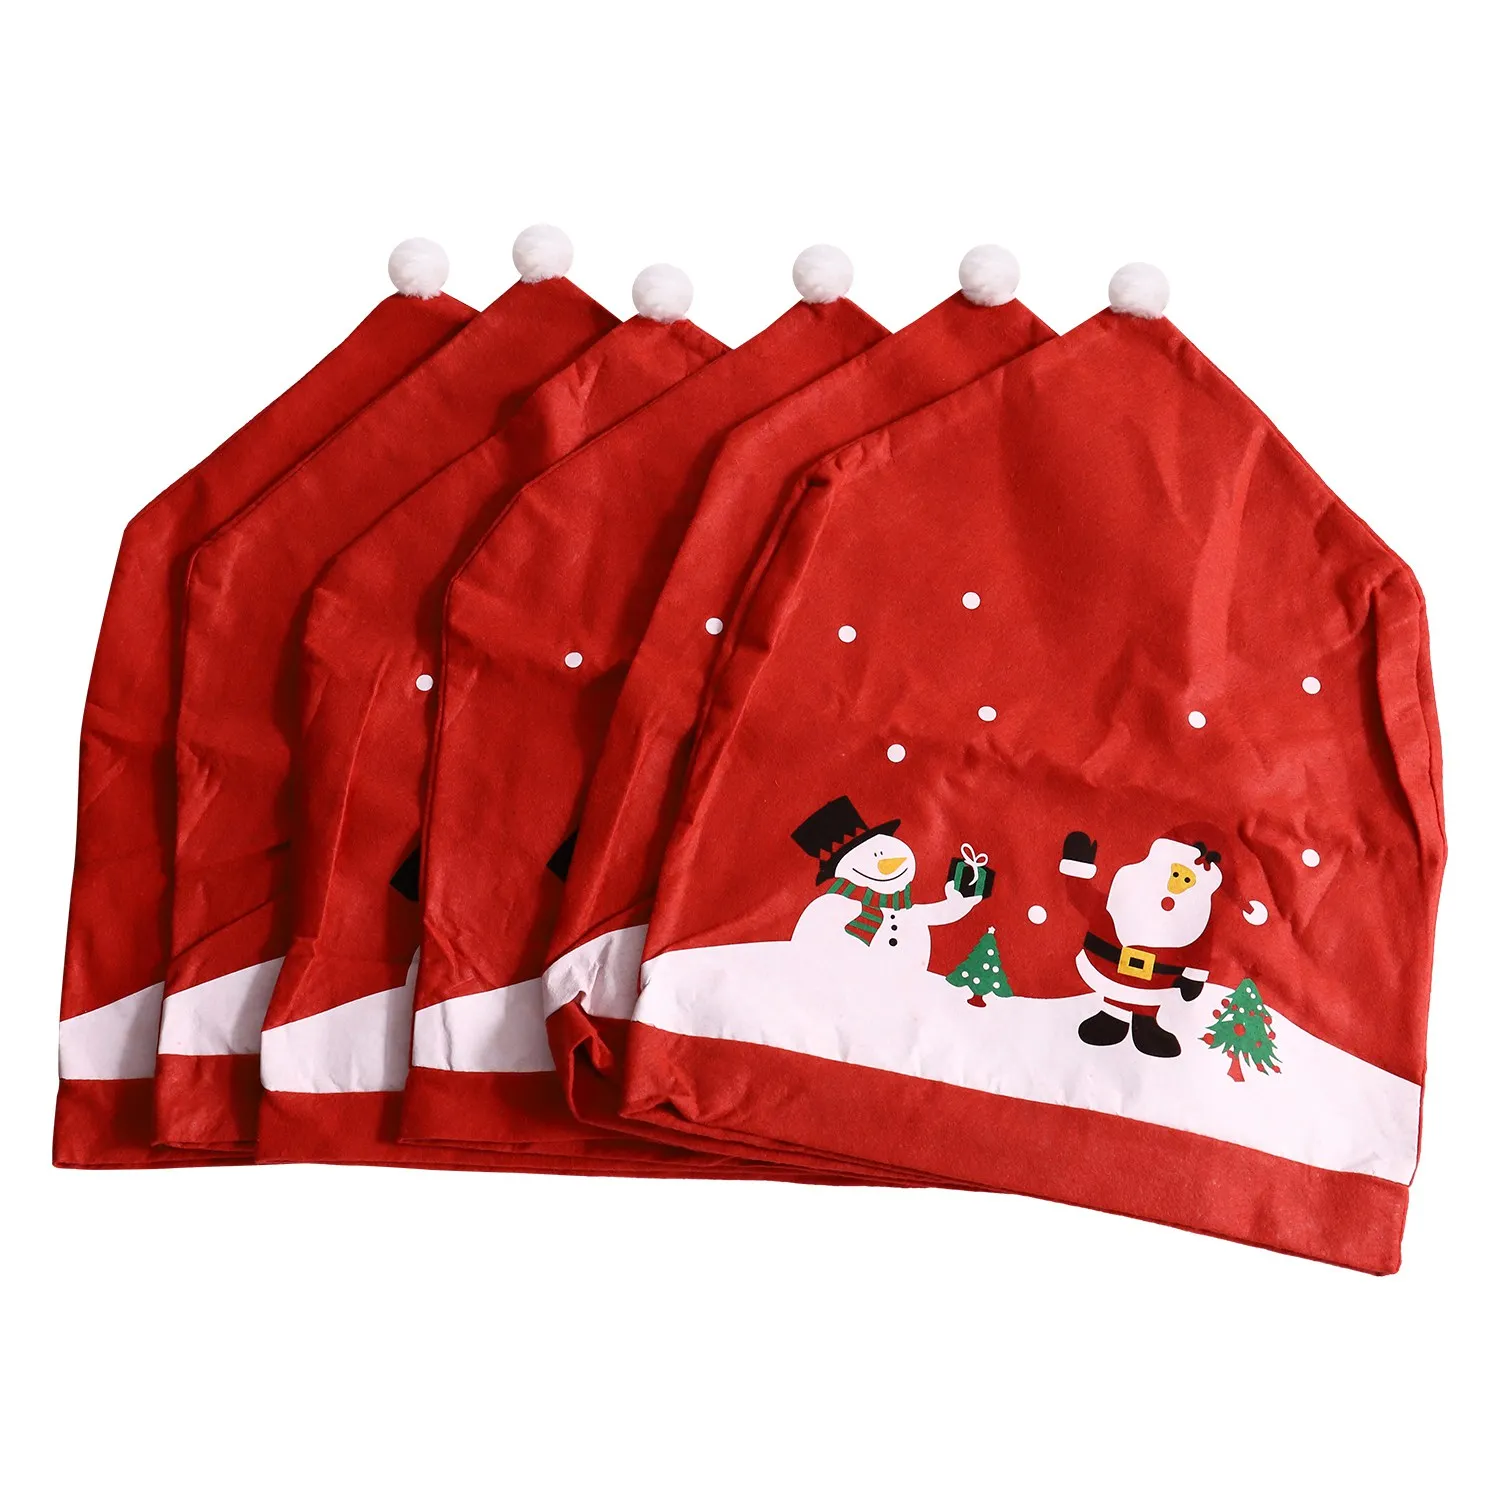 

6Pcs Santa Claus Christmas Chairs Cover Cap Non-Woven Dinner Table Red Hat Chair Back Covers Xmas Christmas Decorations for Home